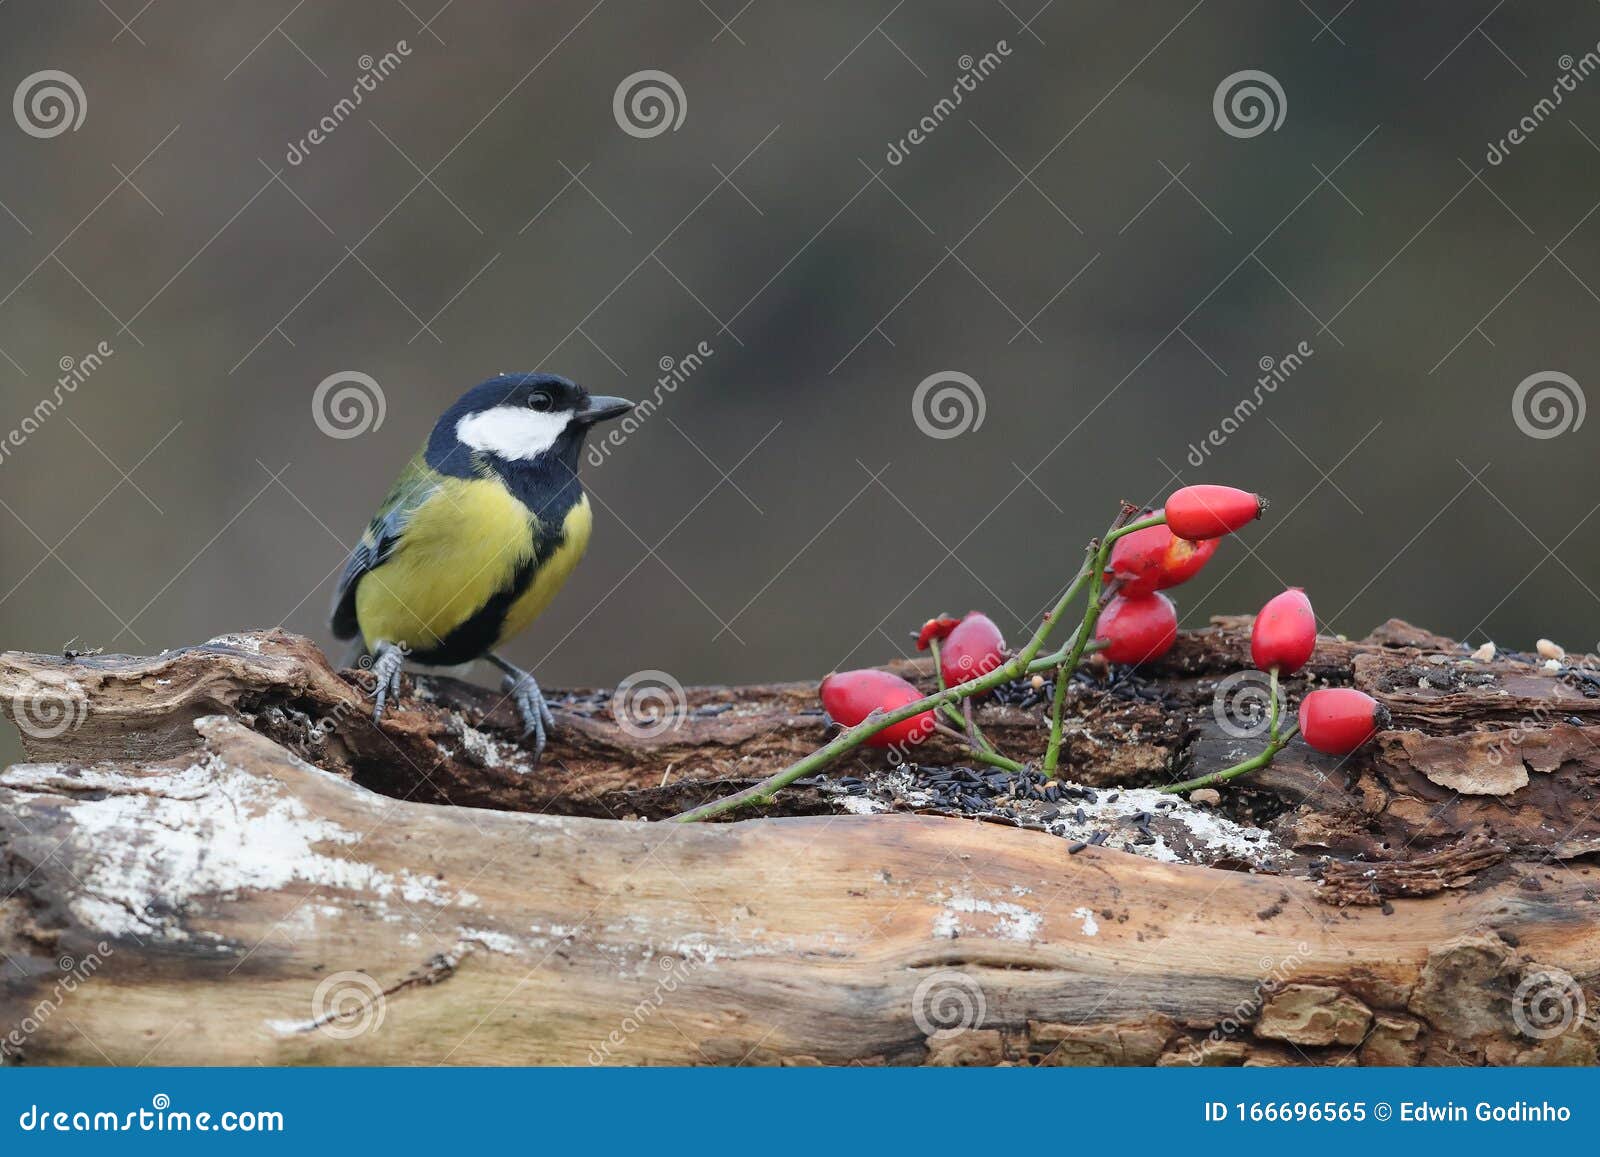 A Great Tit Perched Up on Dead Wood Stock Image - Image of central